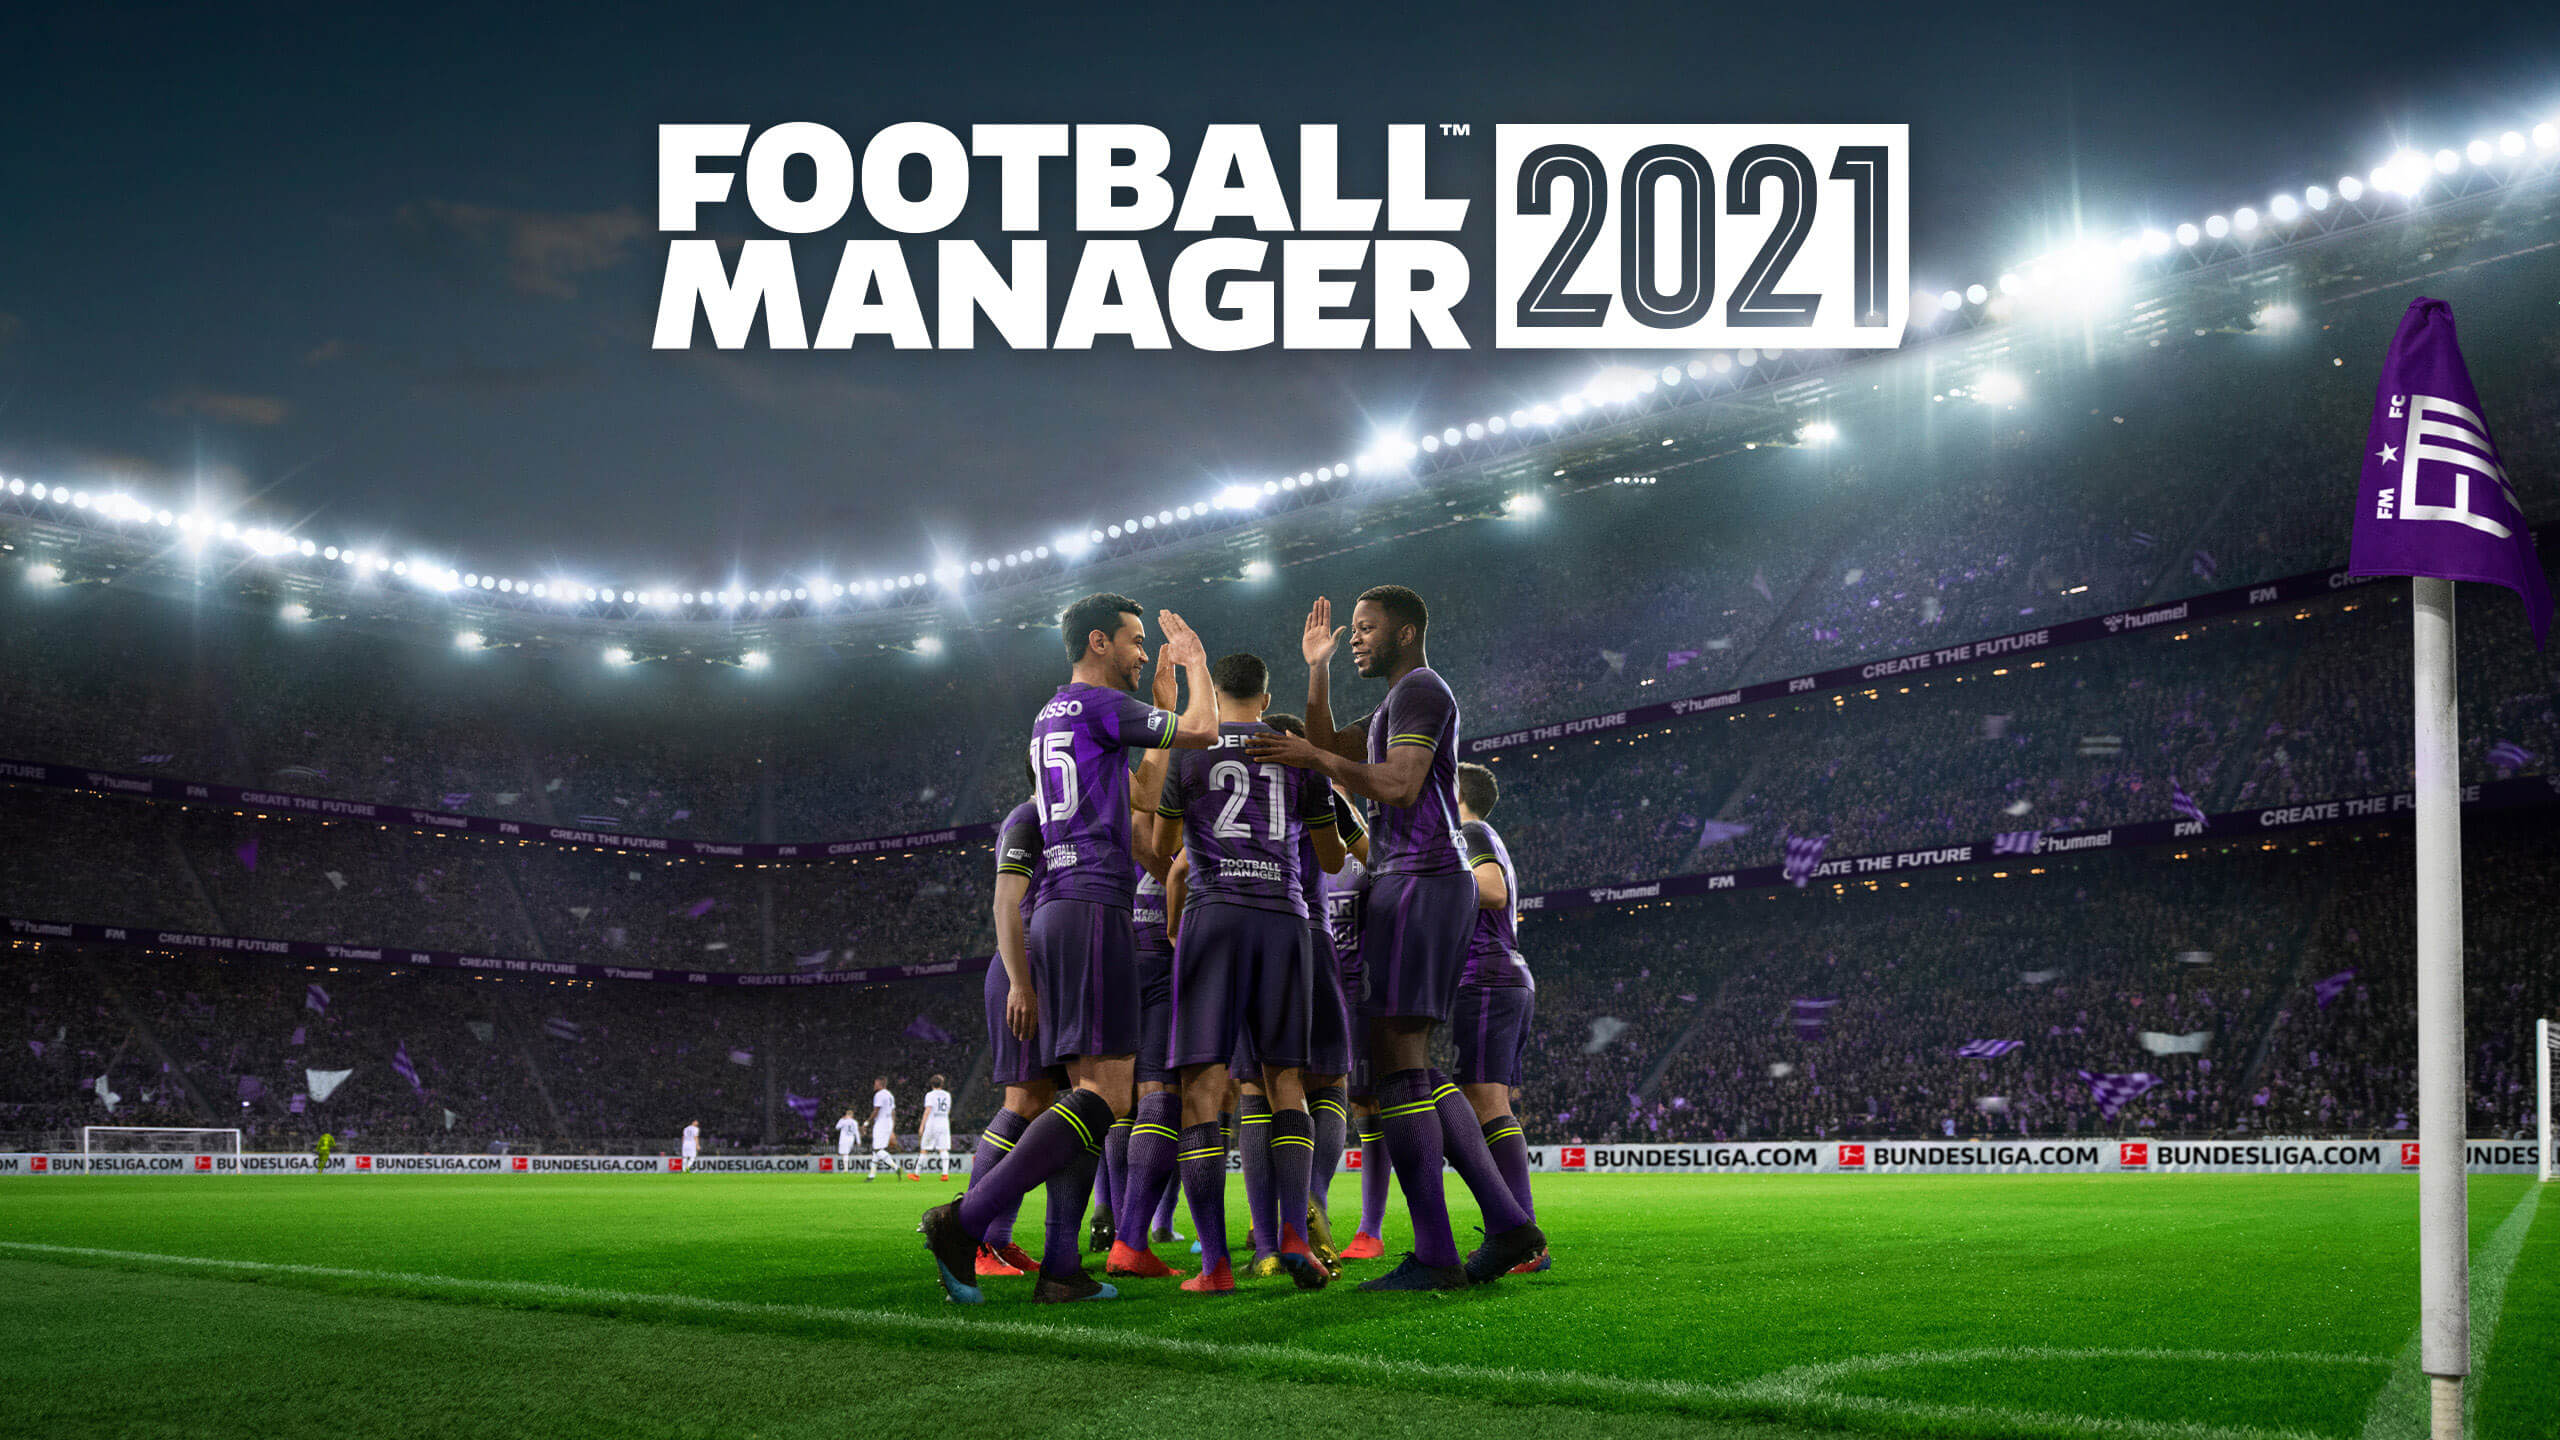 Football Manager 2021 iOS/APK Full Version Free Download